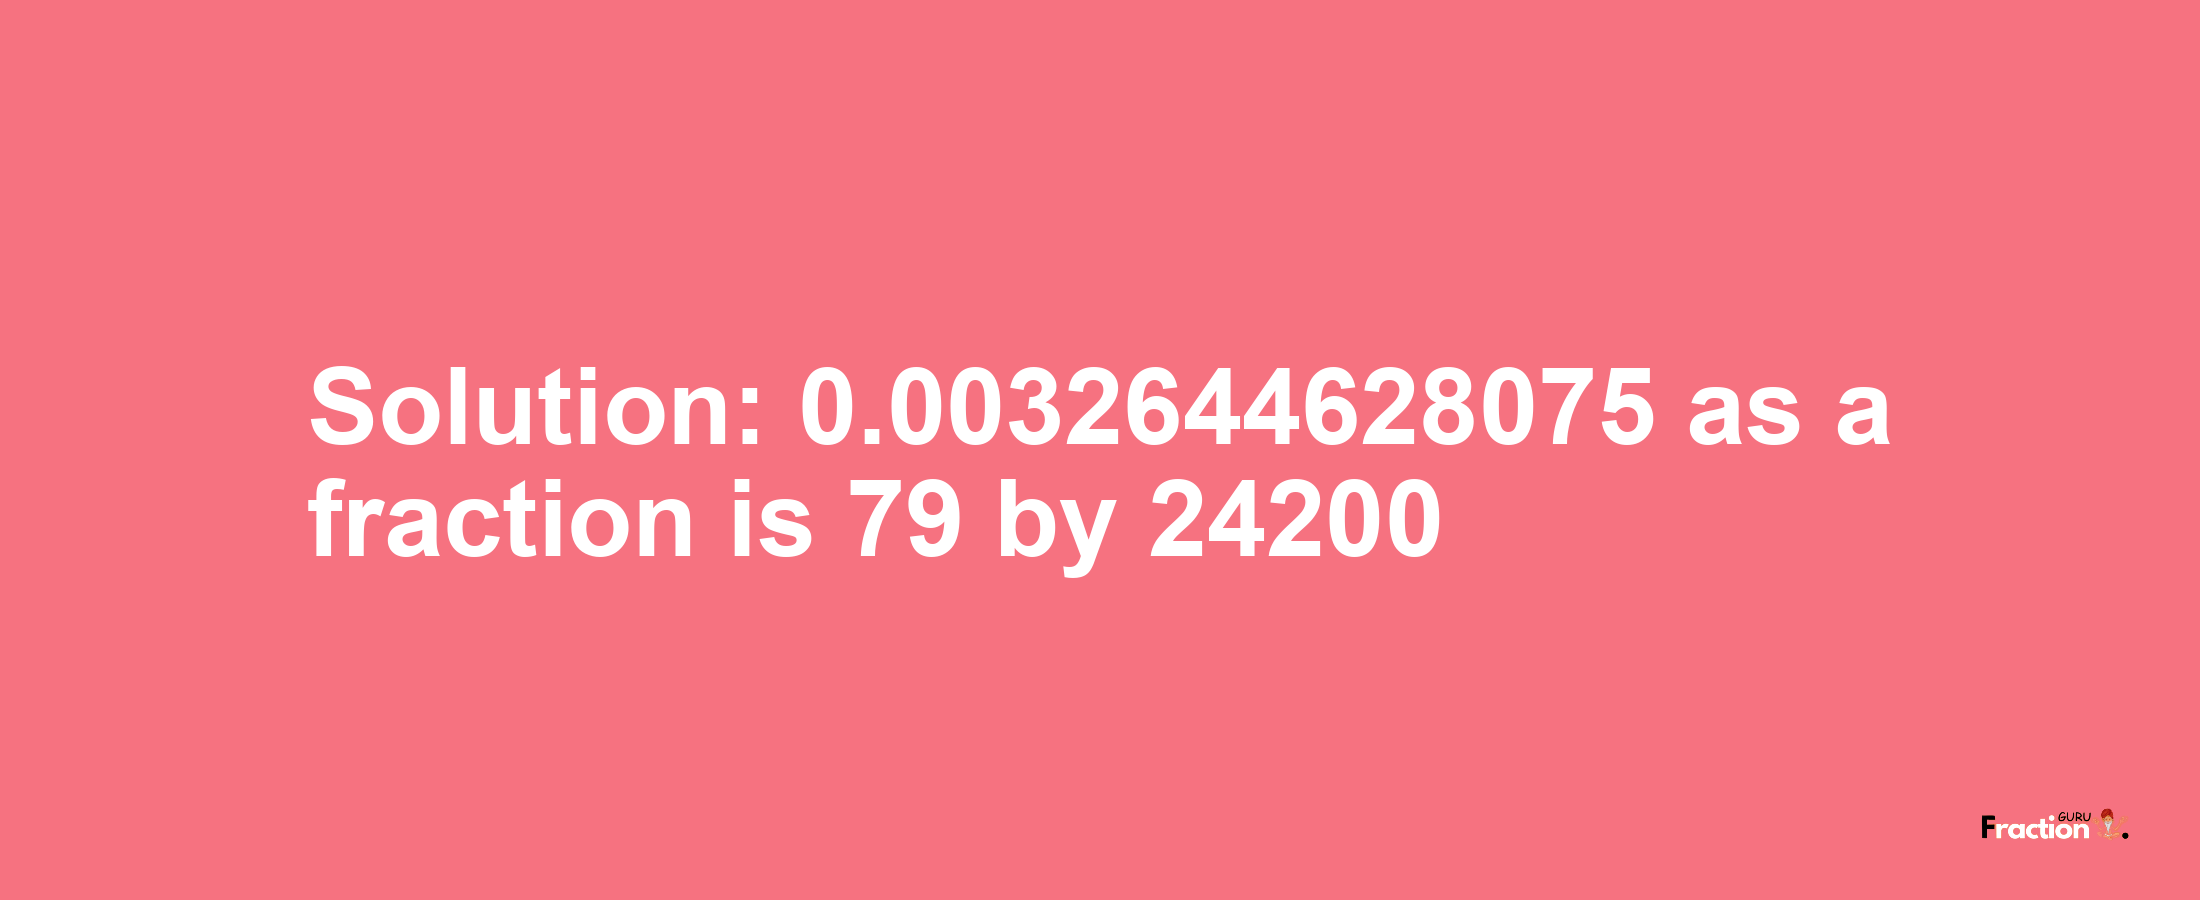 Solution:0.0032644628075 as a fraction is 79/24200